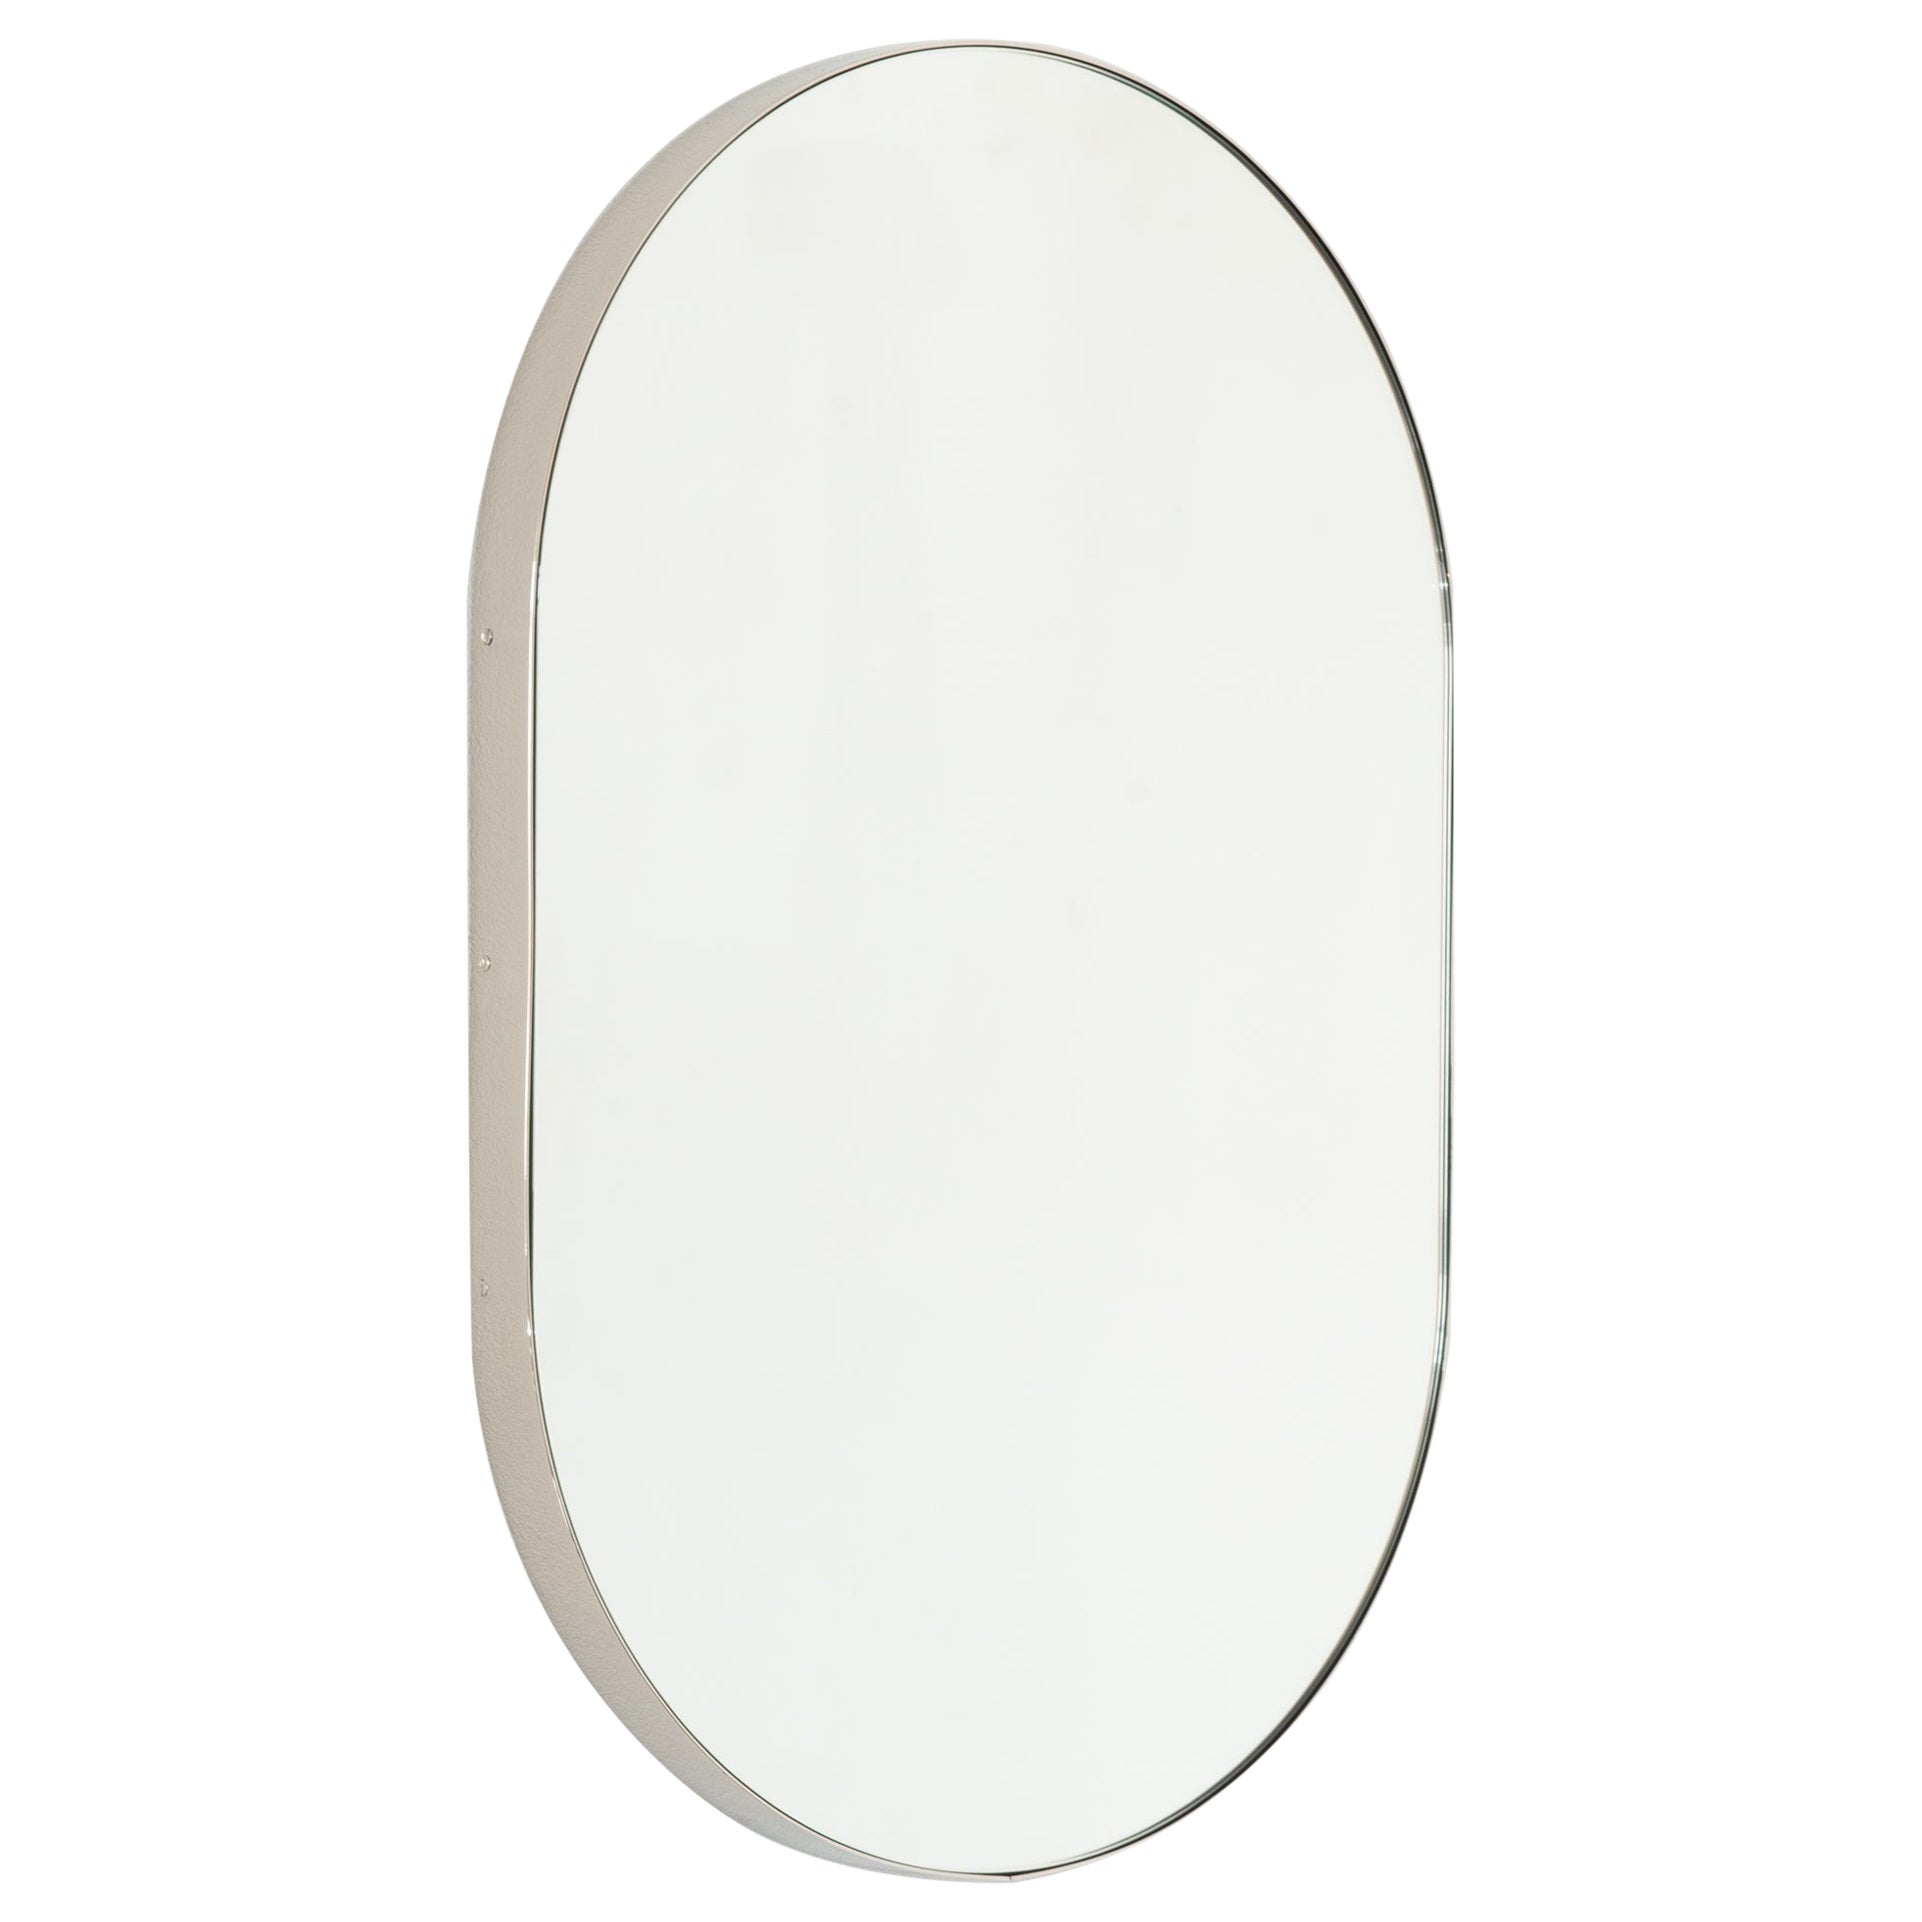 Capsula Pill Shaped Contemporary Mirror with Nickel Plated Frame, Large For Sale